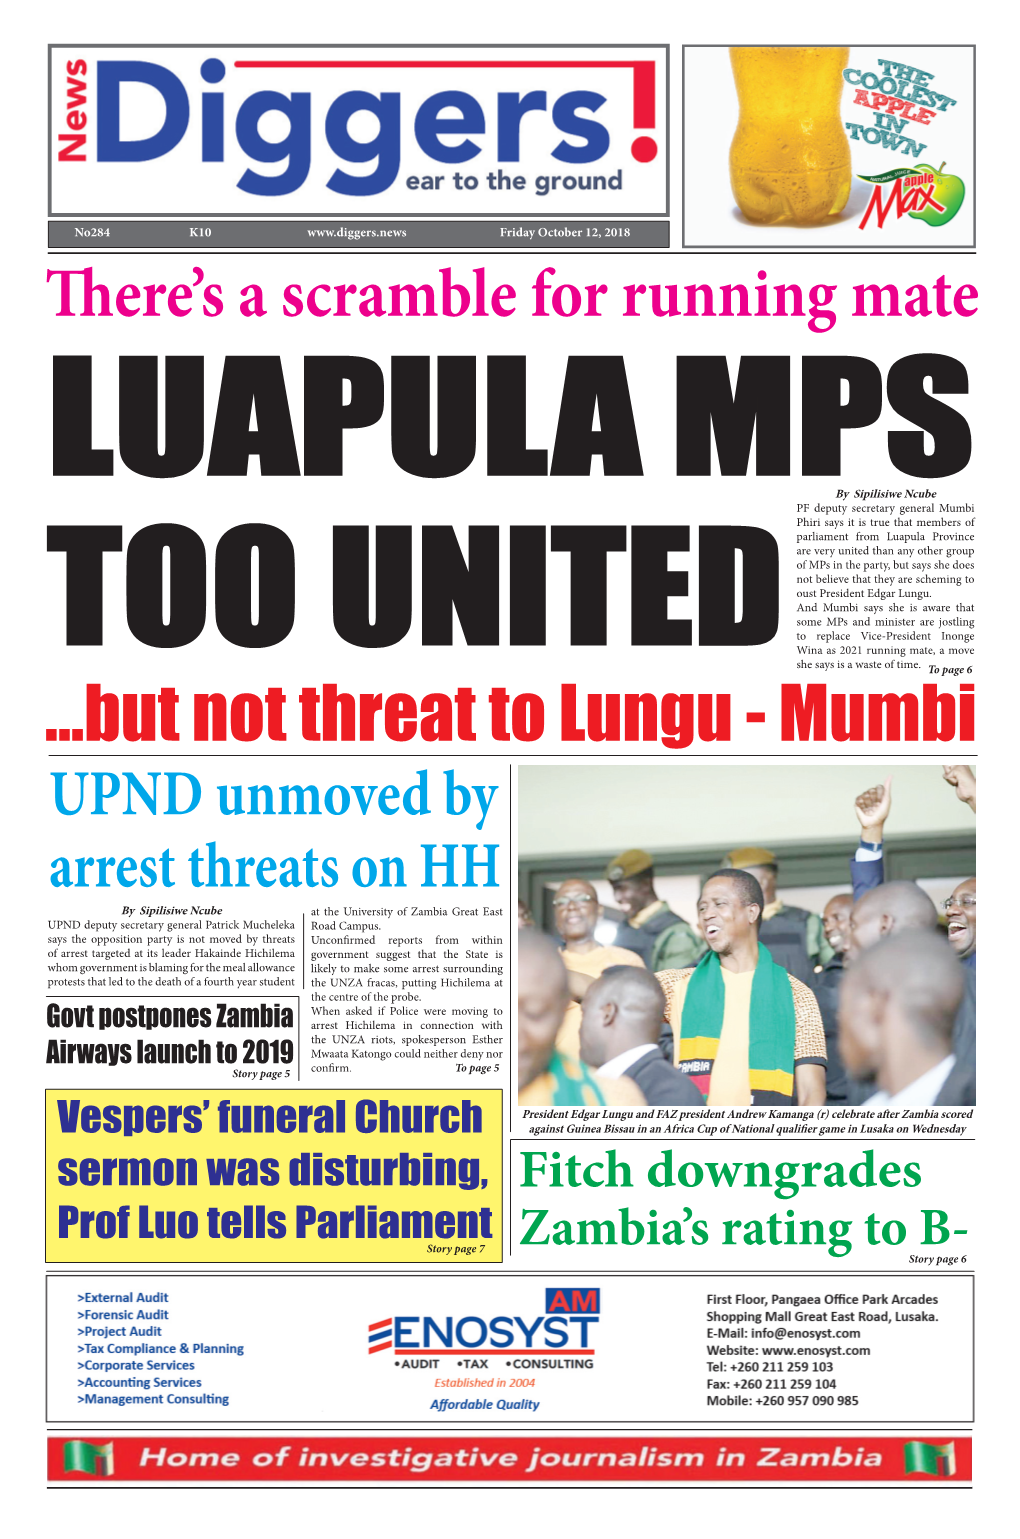 But Not Threat to Lungu